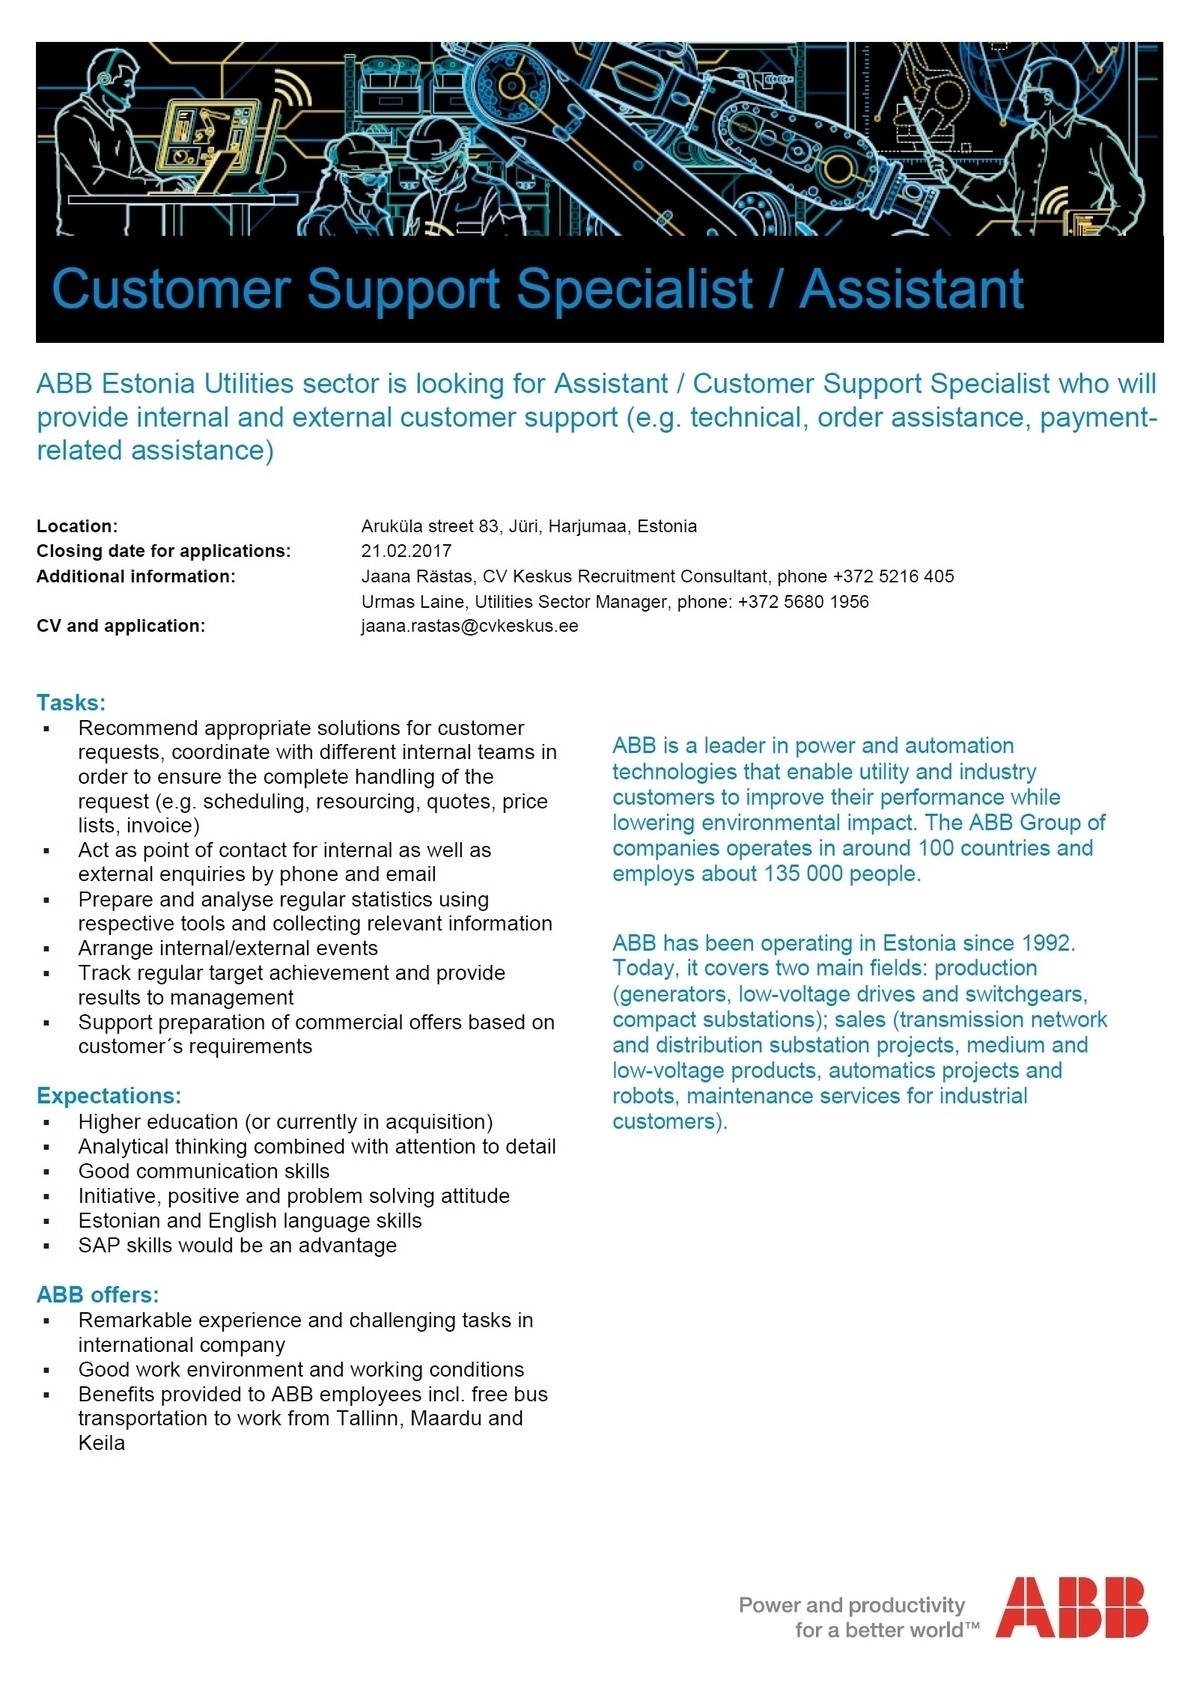 CV KESKUS OÜ ABB is looking for a Customer Support Specialist / Assistant